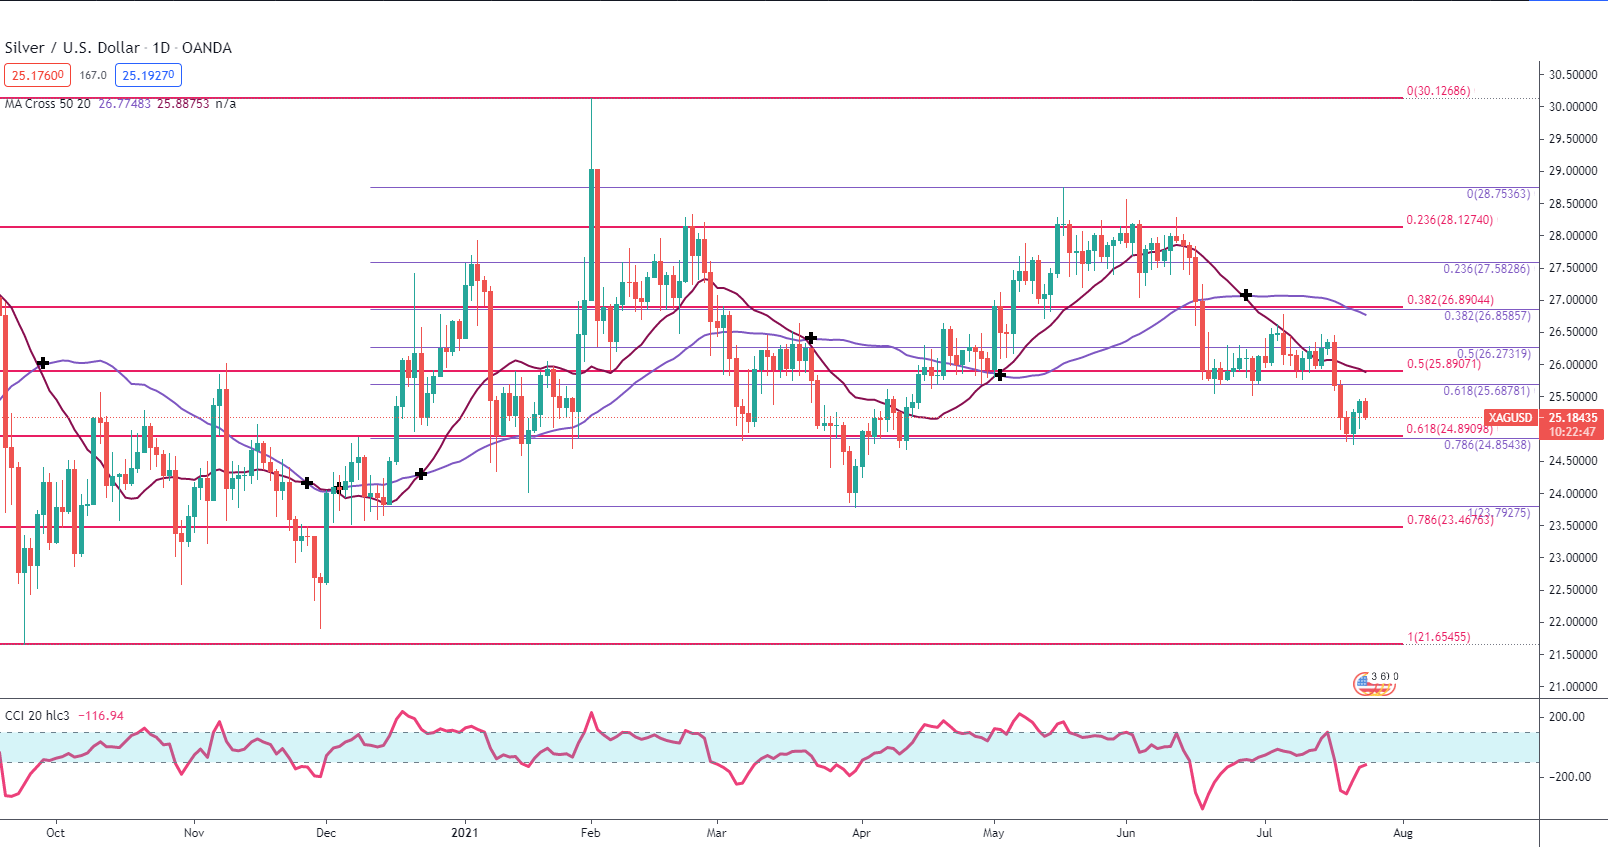 Gold (XAU/USD) and Silver (XAG/USD) at Critical Levels ahead of FOMC 